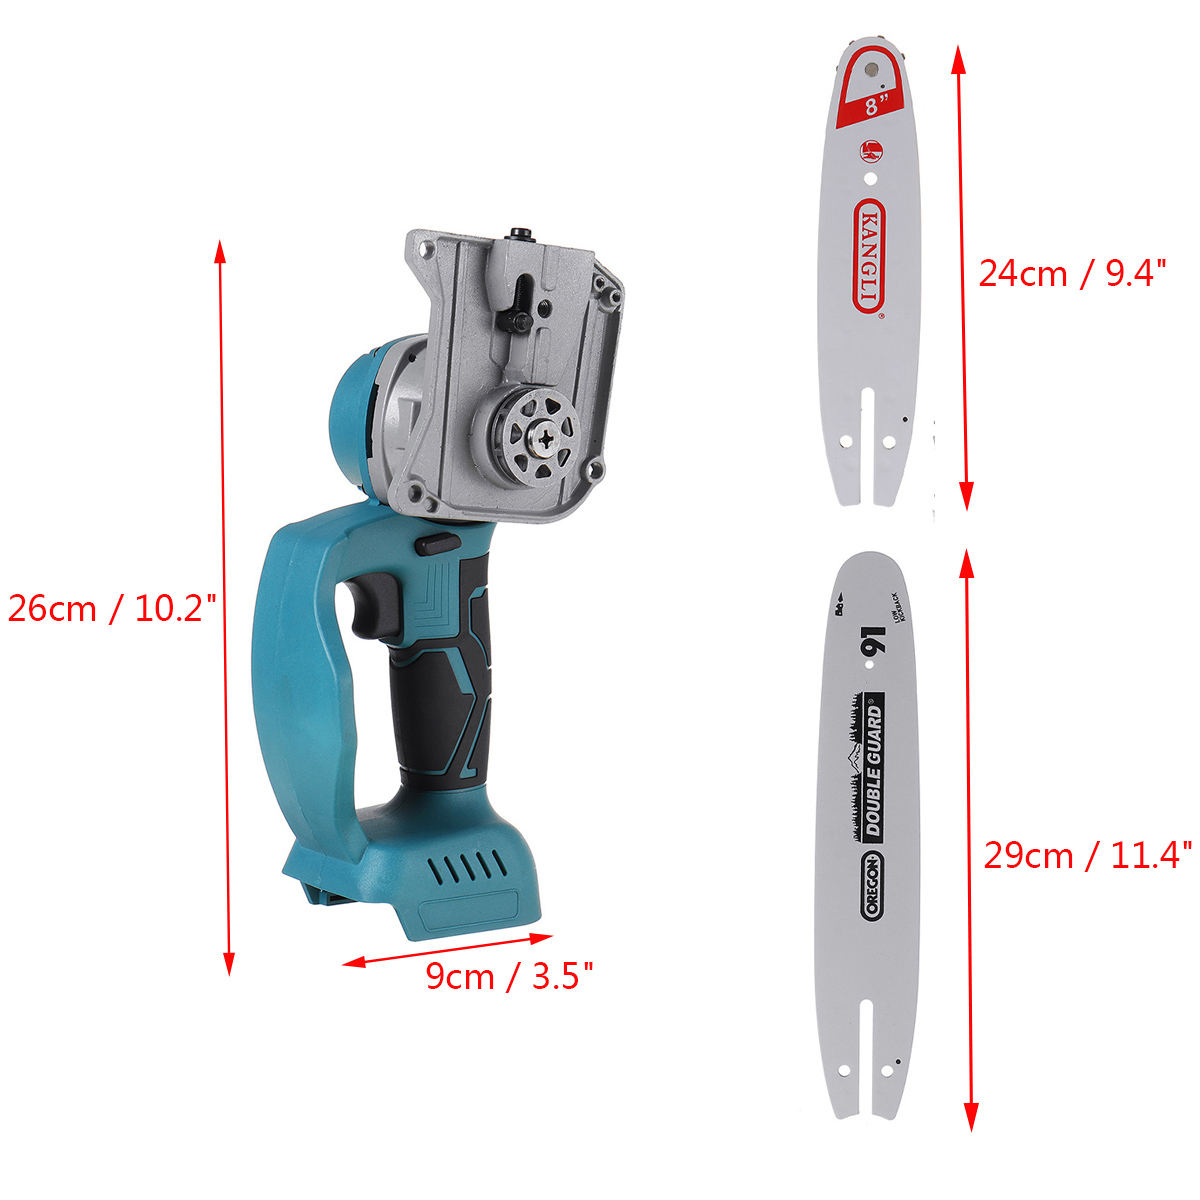 21V-Cordless-Electric-Chain-Saw-Wood-Mini-Cutter-One-Hand-Saw-Woodworking-Tool-1809275-13